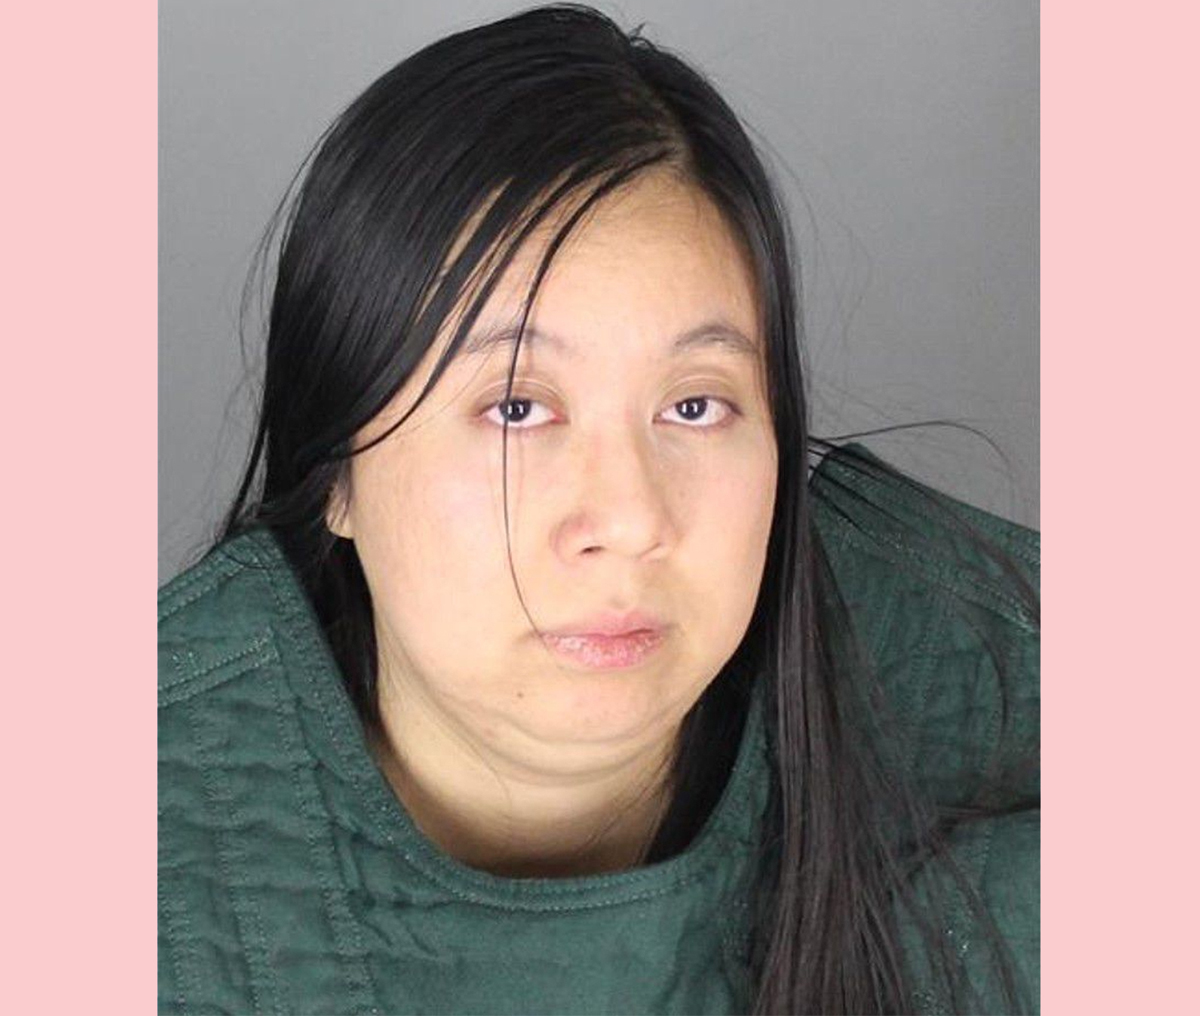 #32-Year-Old Woman Allegedly Flew Cross-Country To Have Sex With 15-Year-Old Boy In Airbnb